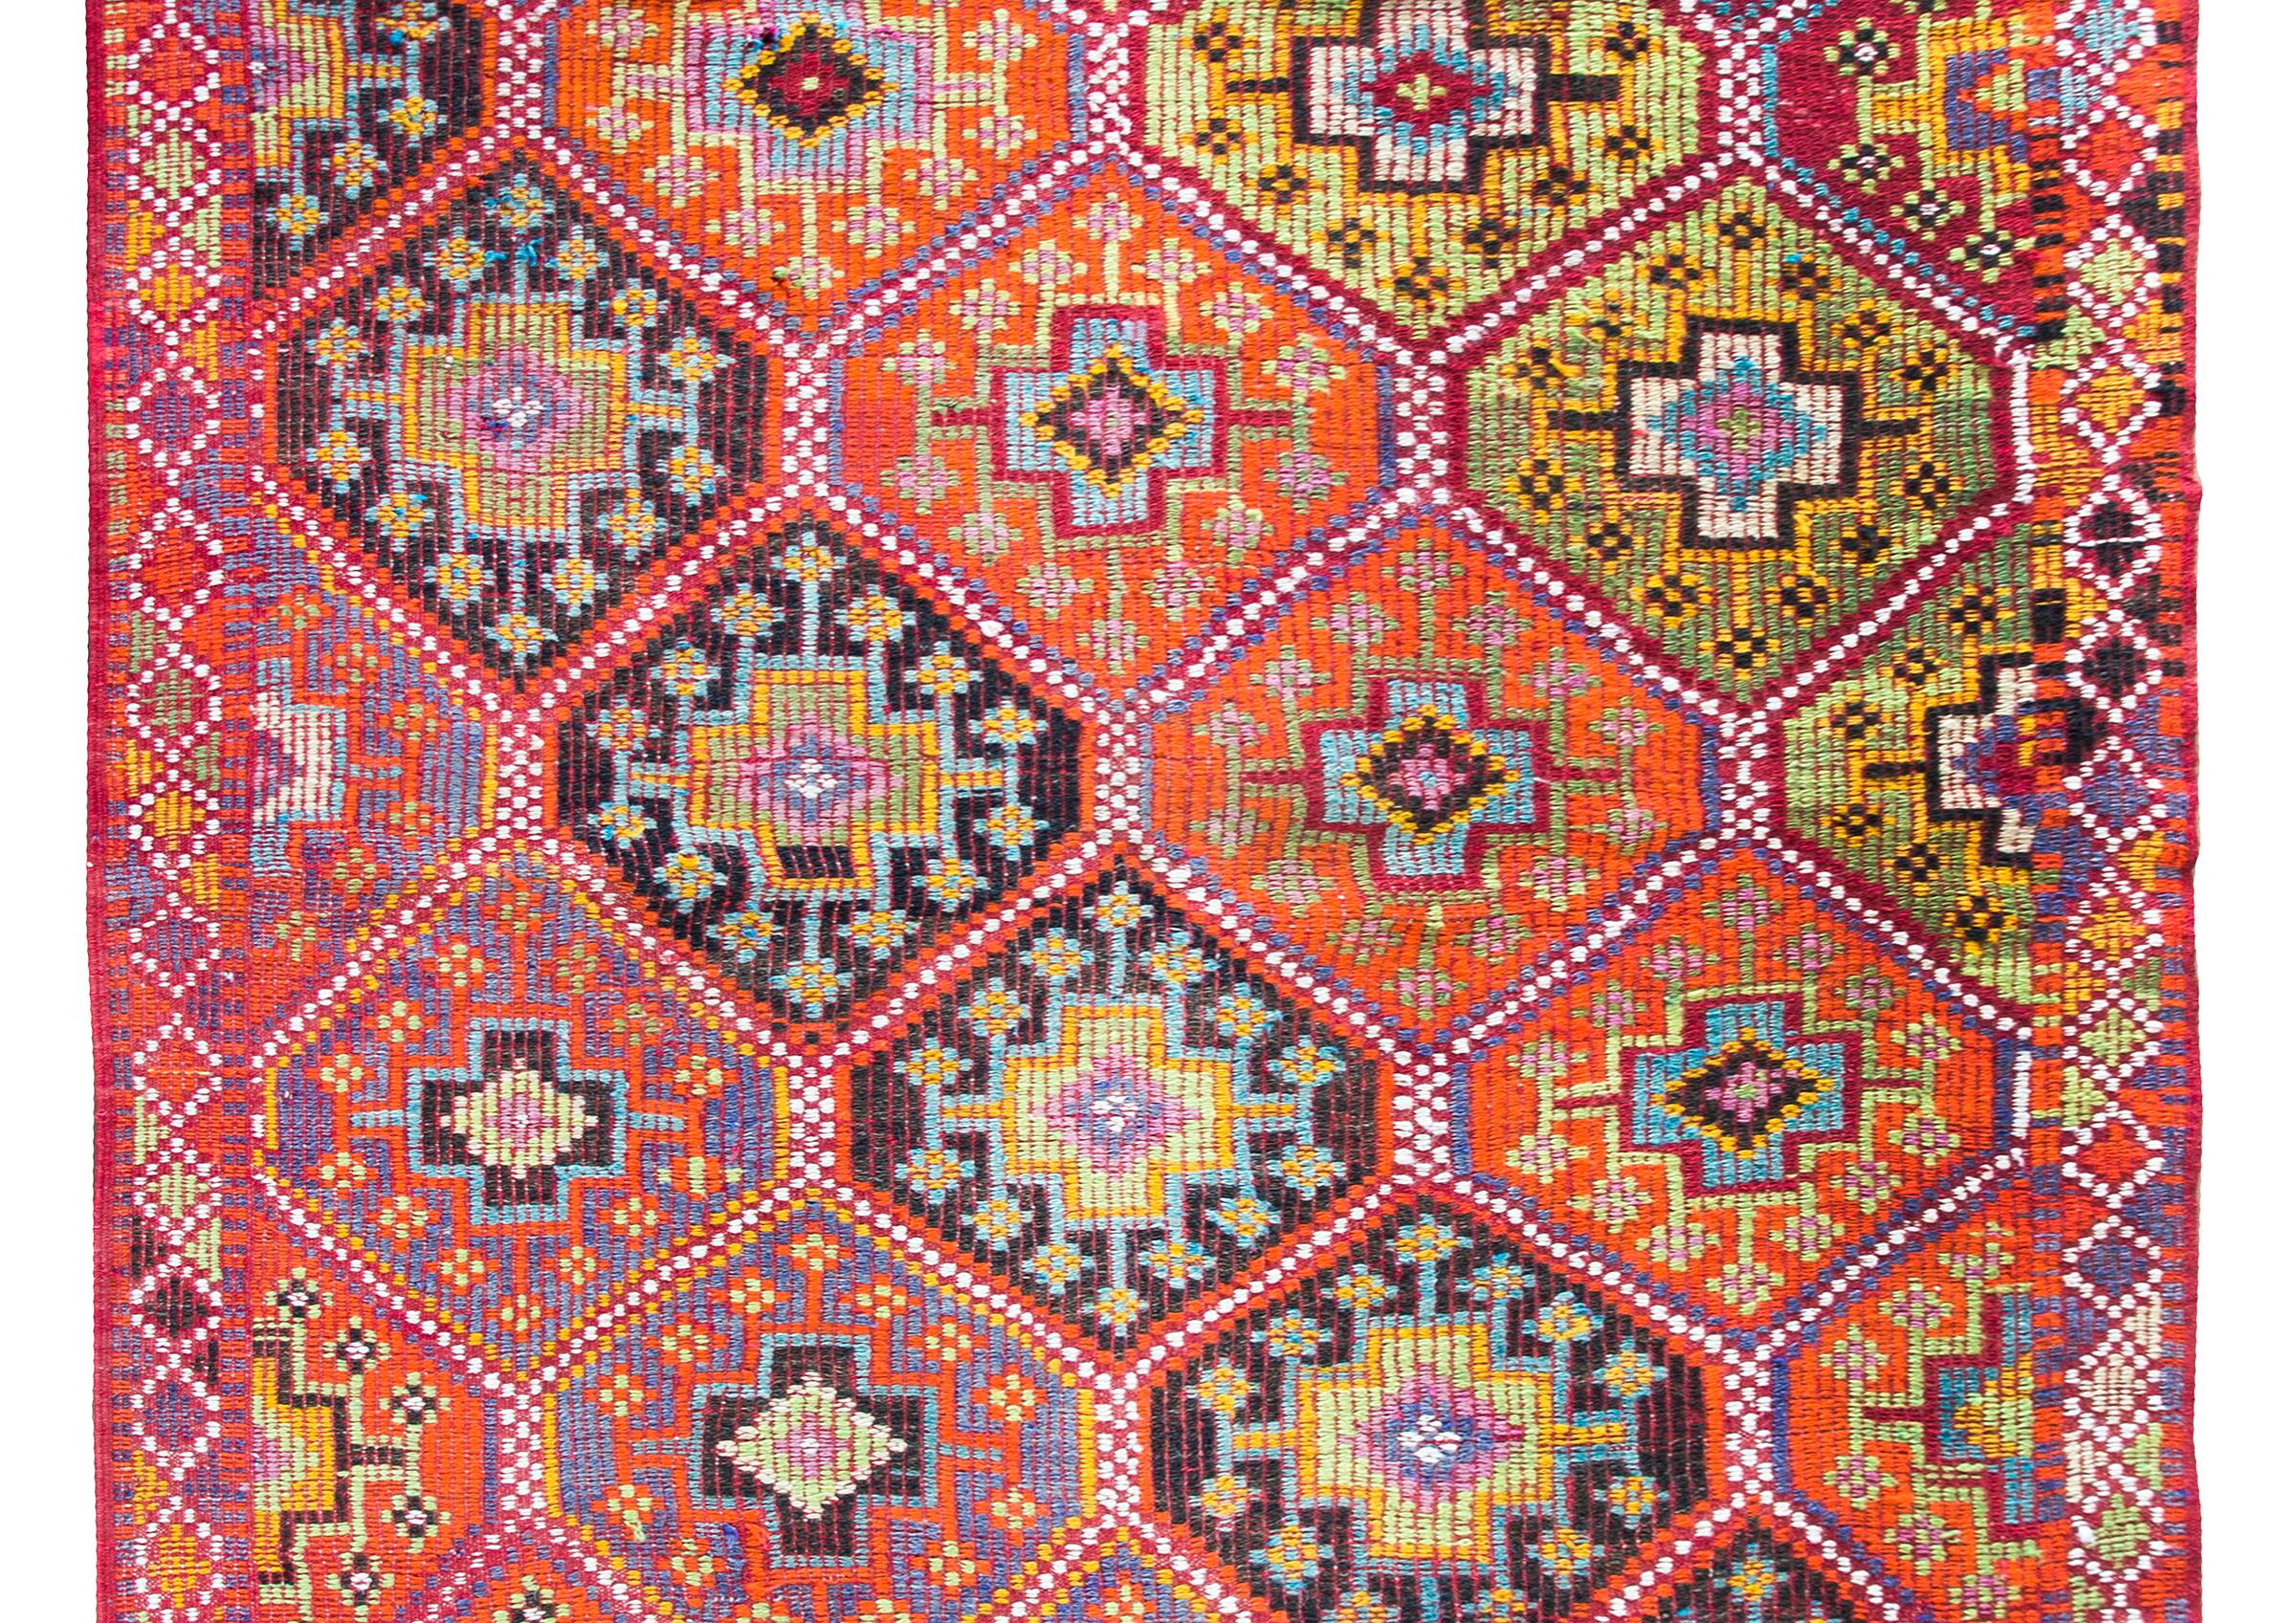 A chic and bold mid-20th century Turkish Konya fltaweave rug with a wonderful pattern of diamond medallions with stylized flowers organized in diagonal stripes and woven in brilliant oranges, golds, light and dark indigos, white, pinks, and violets.